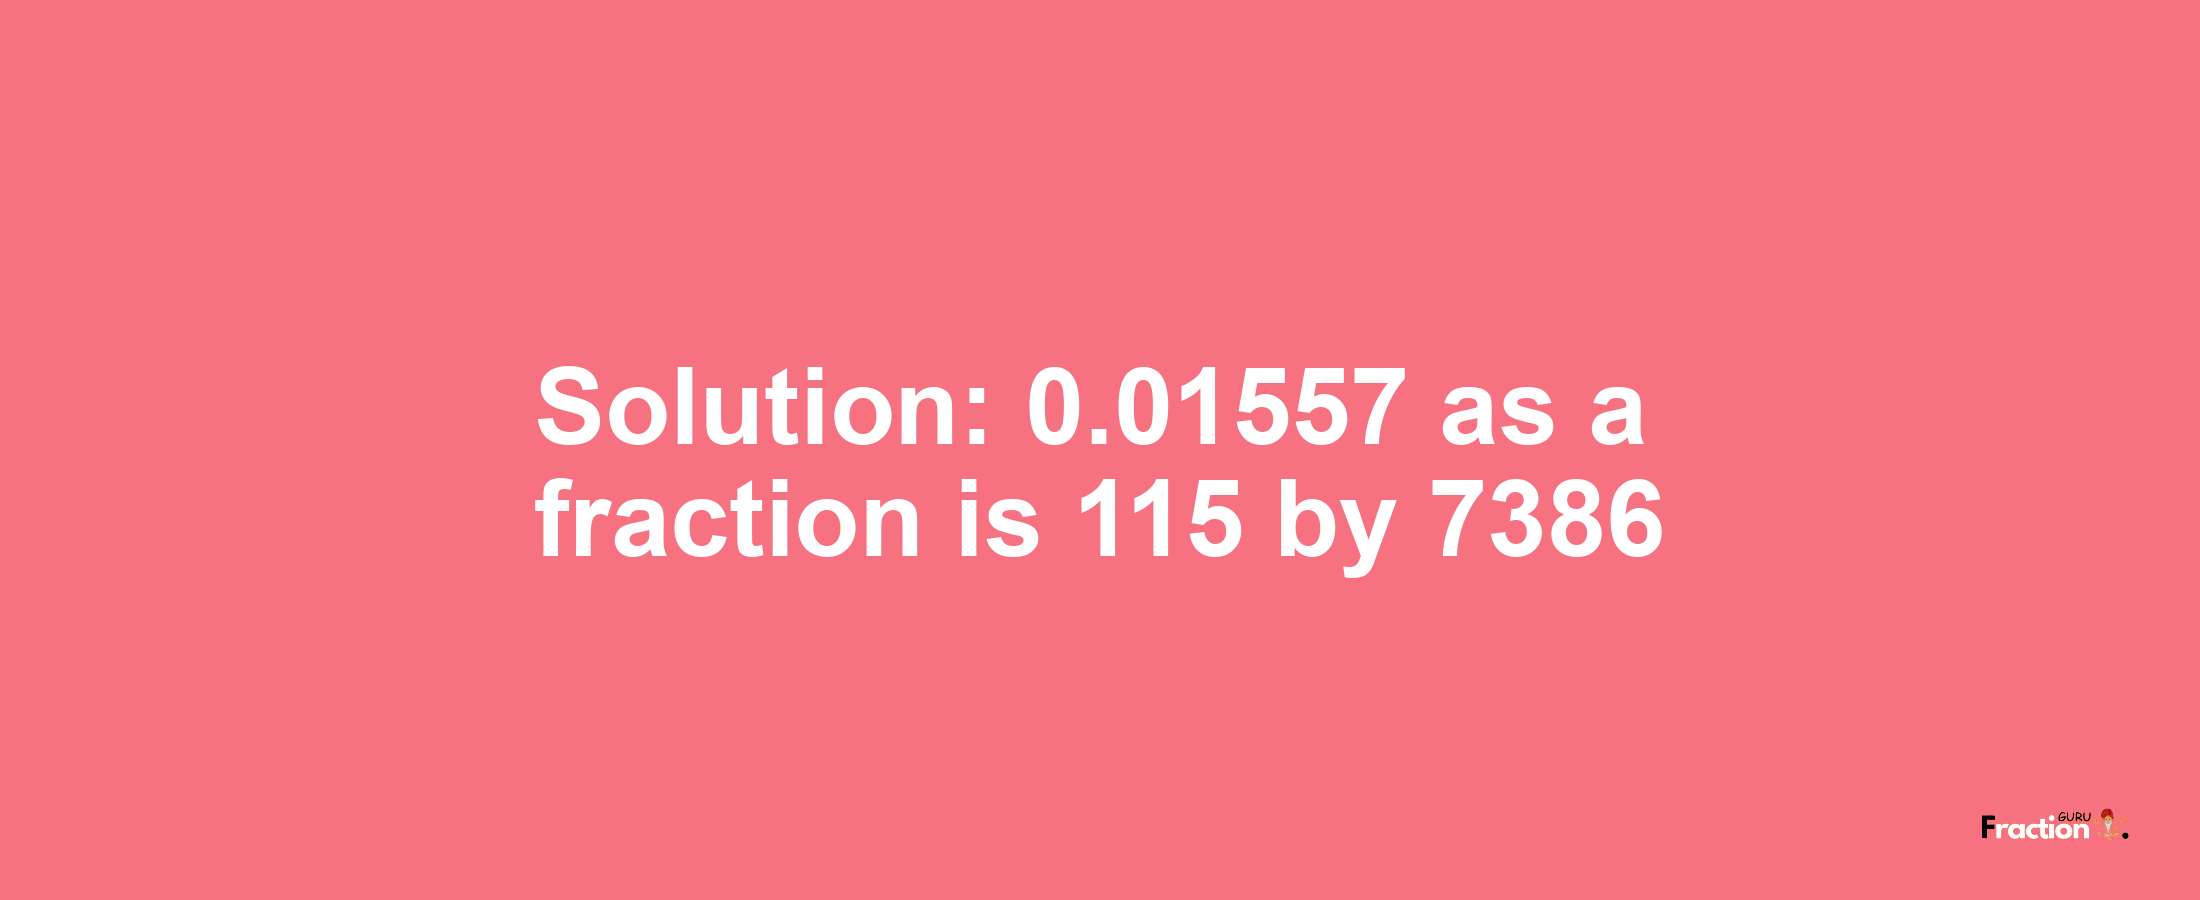 Solution:0.01557 as a fraction is 115/7386